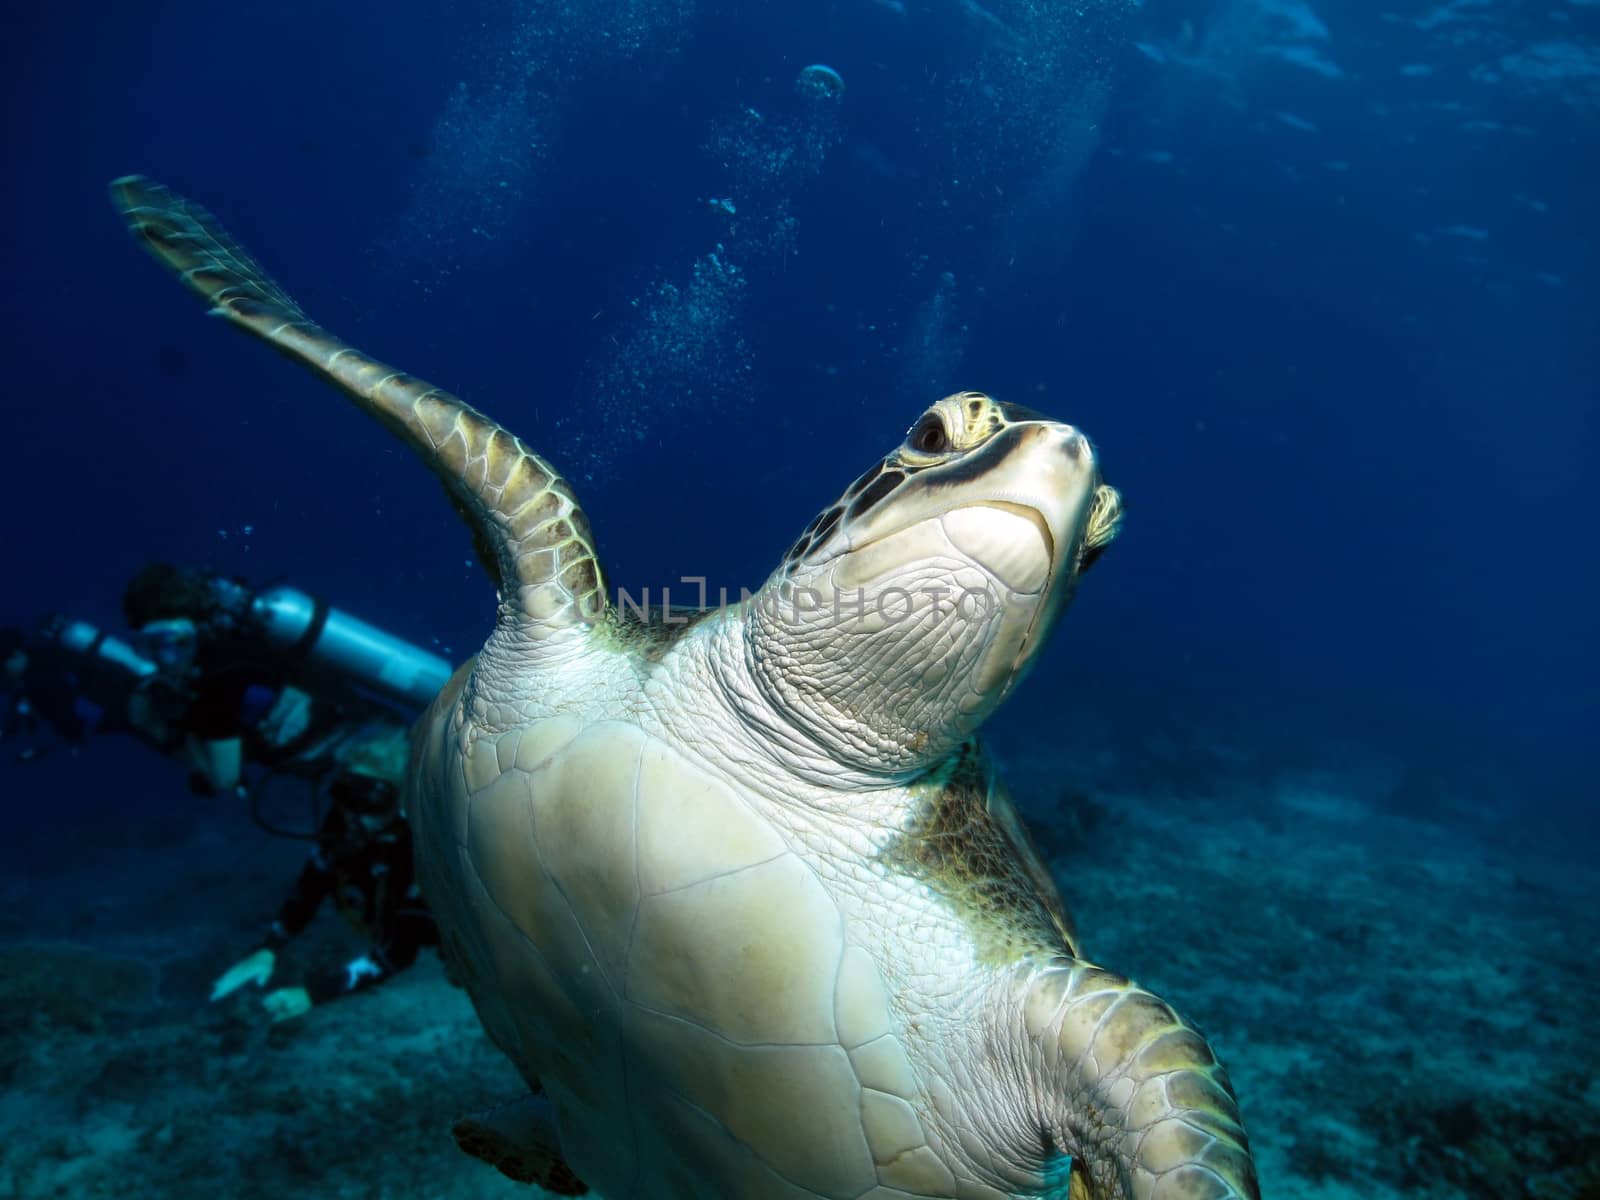 Green Hawkskbill Turtle with a scuba diver in the background